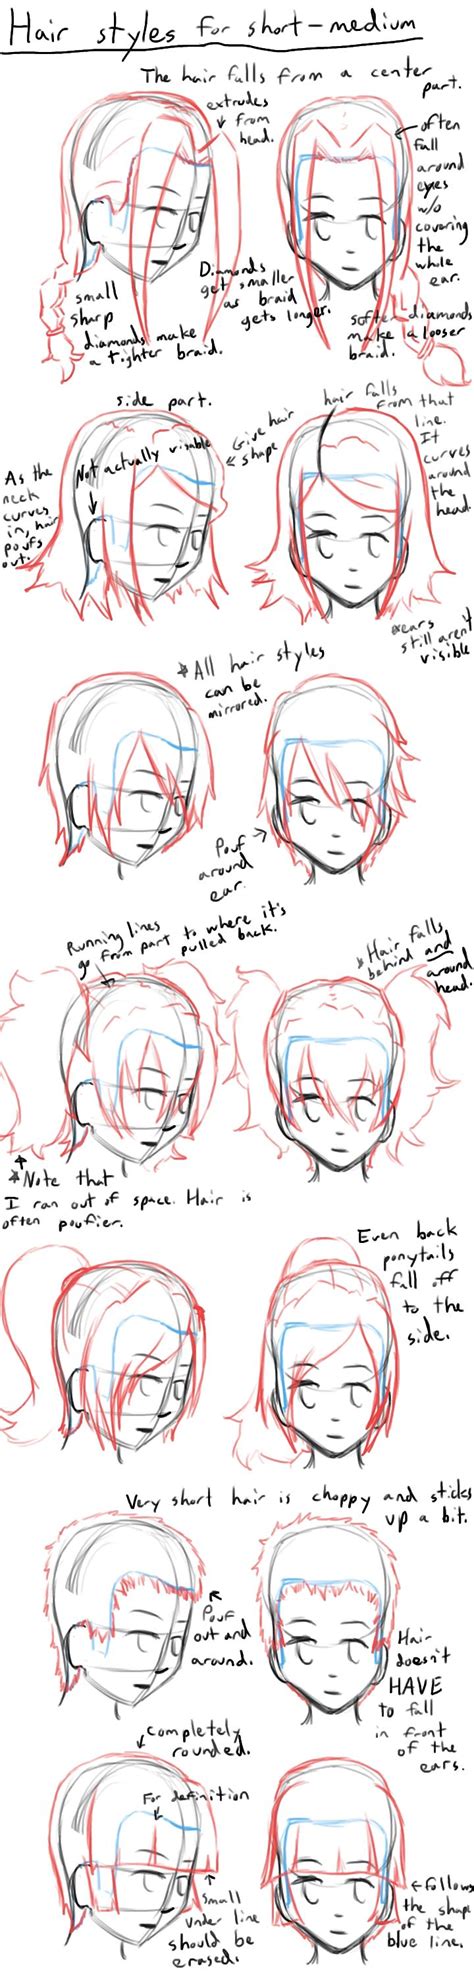 How To Draw Anime Hair Styles By Learntodrawanime On Deviantart